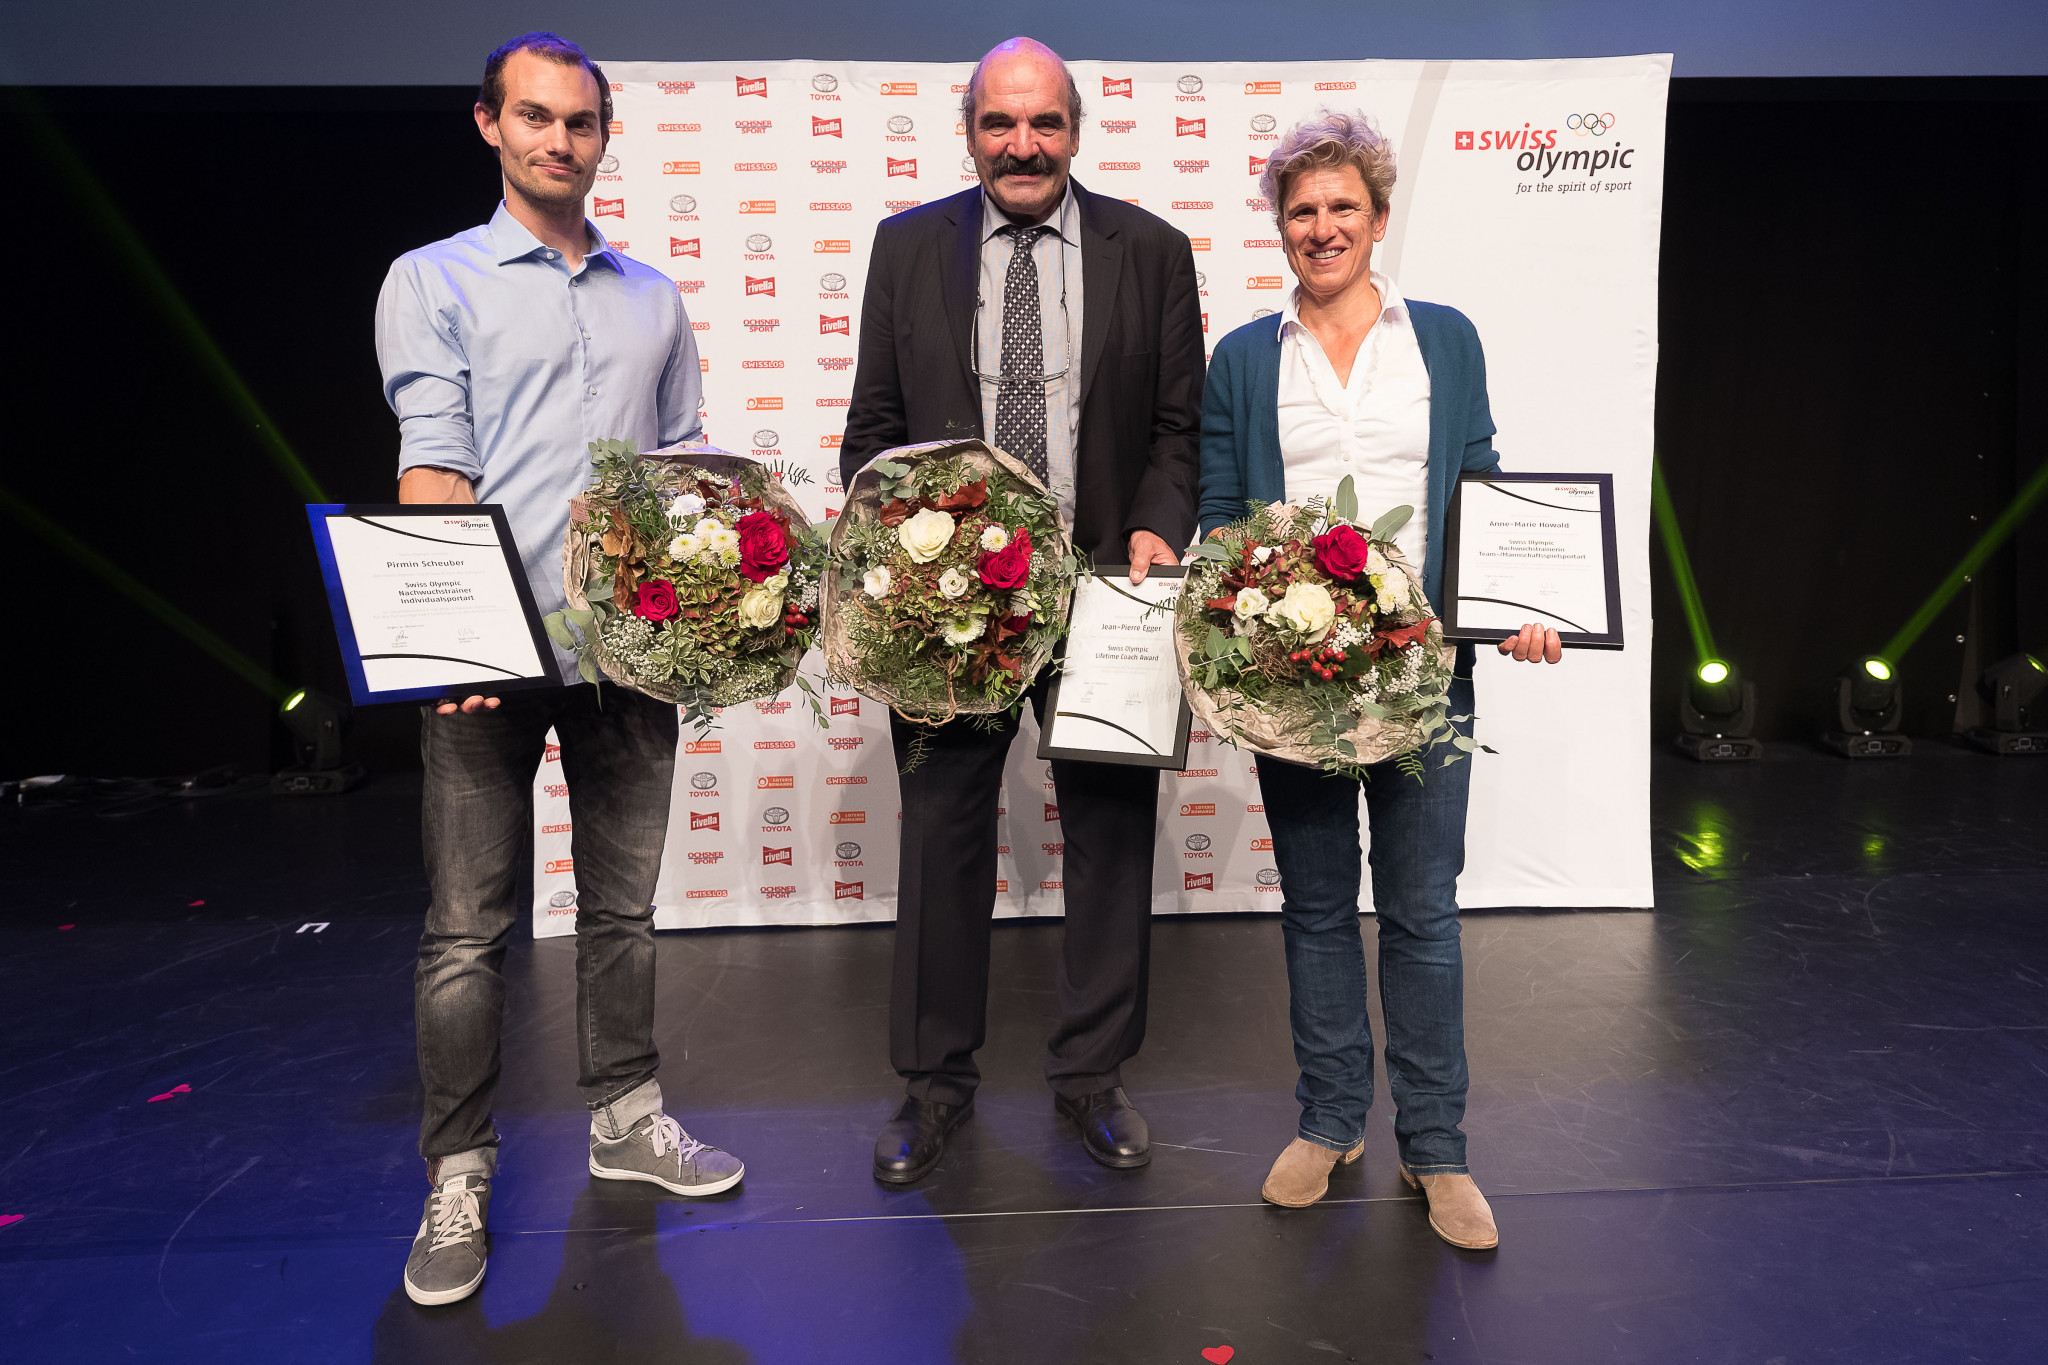 Swiss Olympic has named its Coach of the Year award winners ©Swiss Olympic